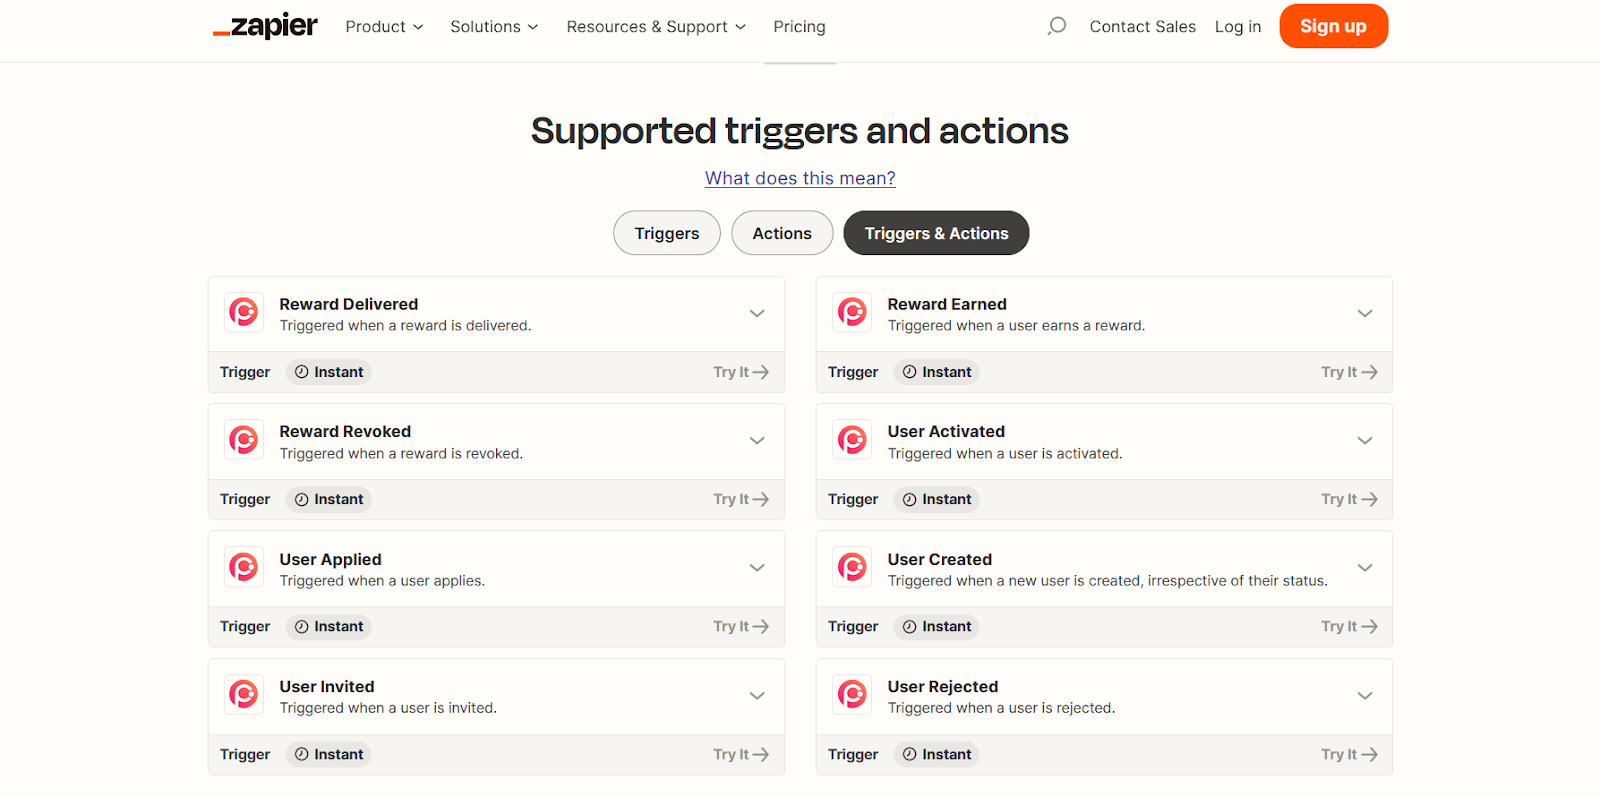 Zapier’s supported triggers and actions for Prefinery users.